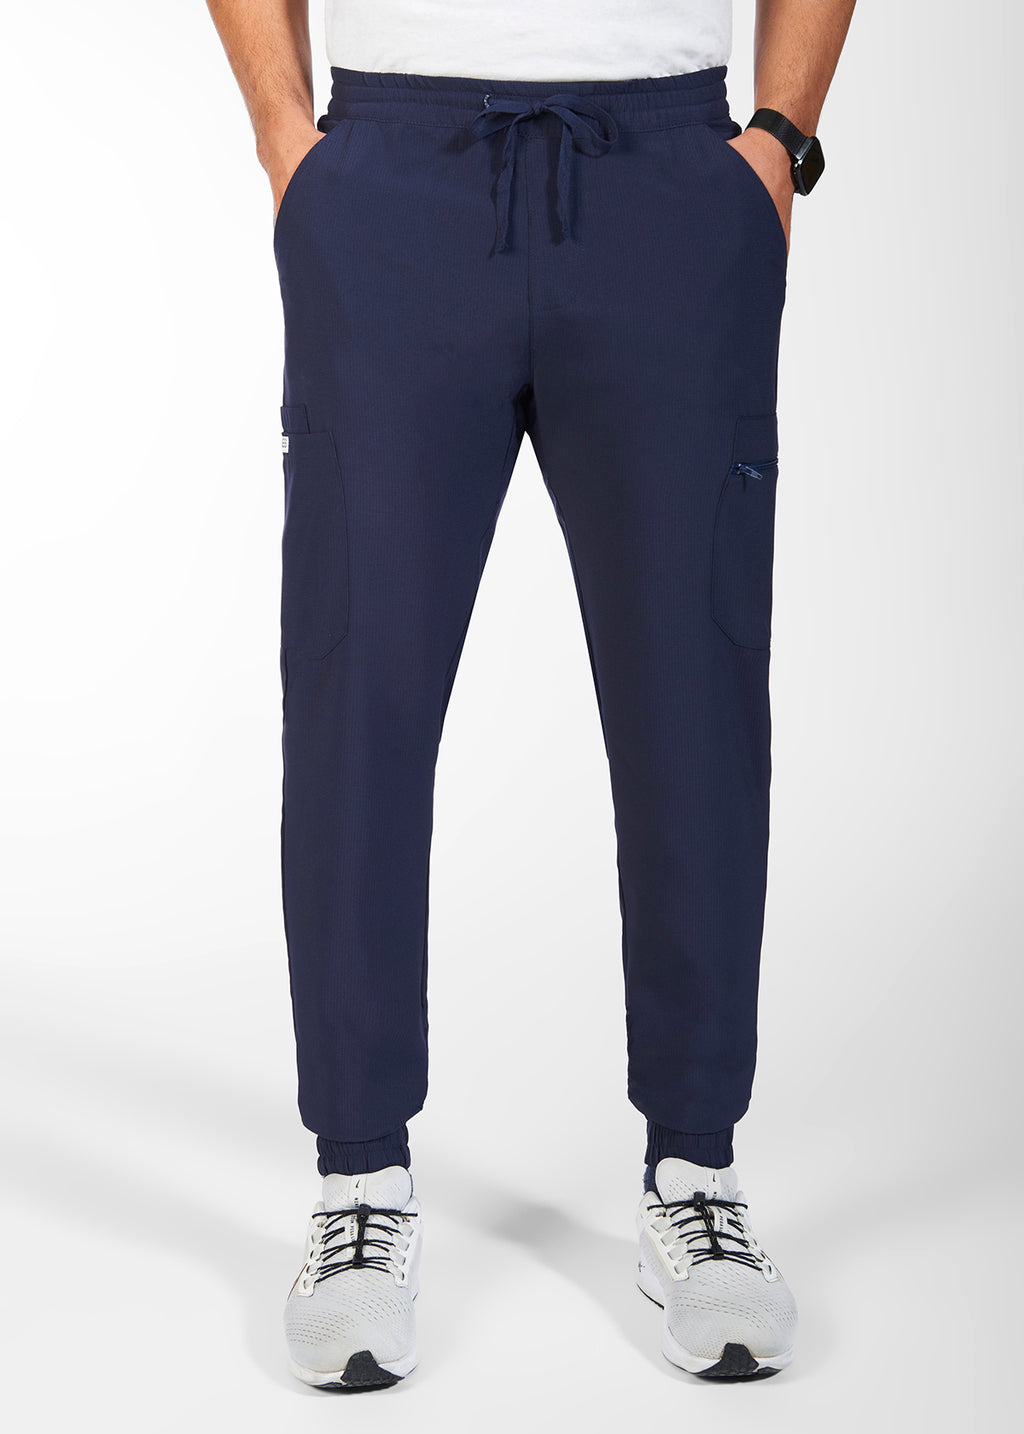 Product - Adrian MOBB Unisex Jogger Fit